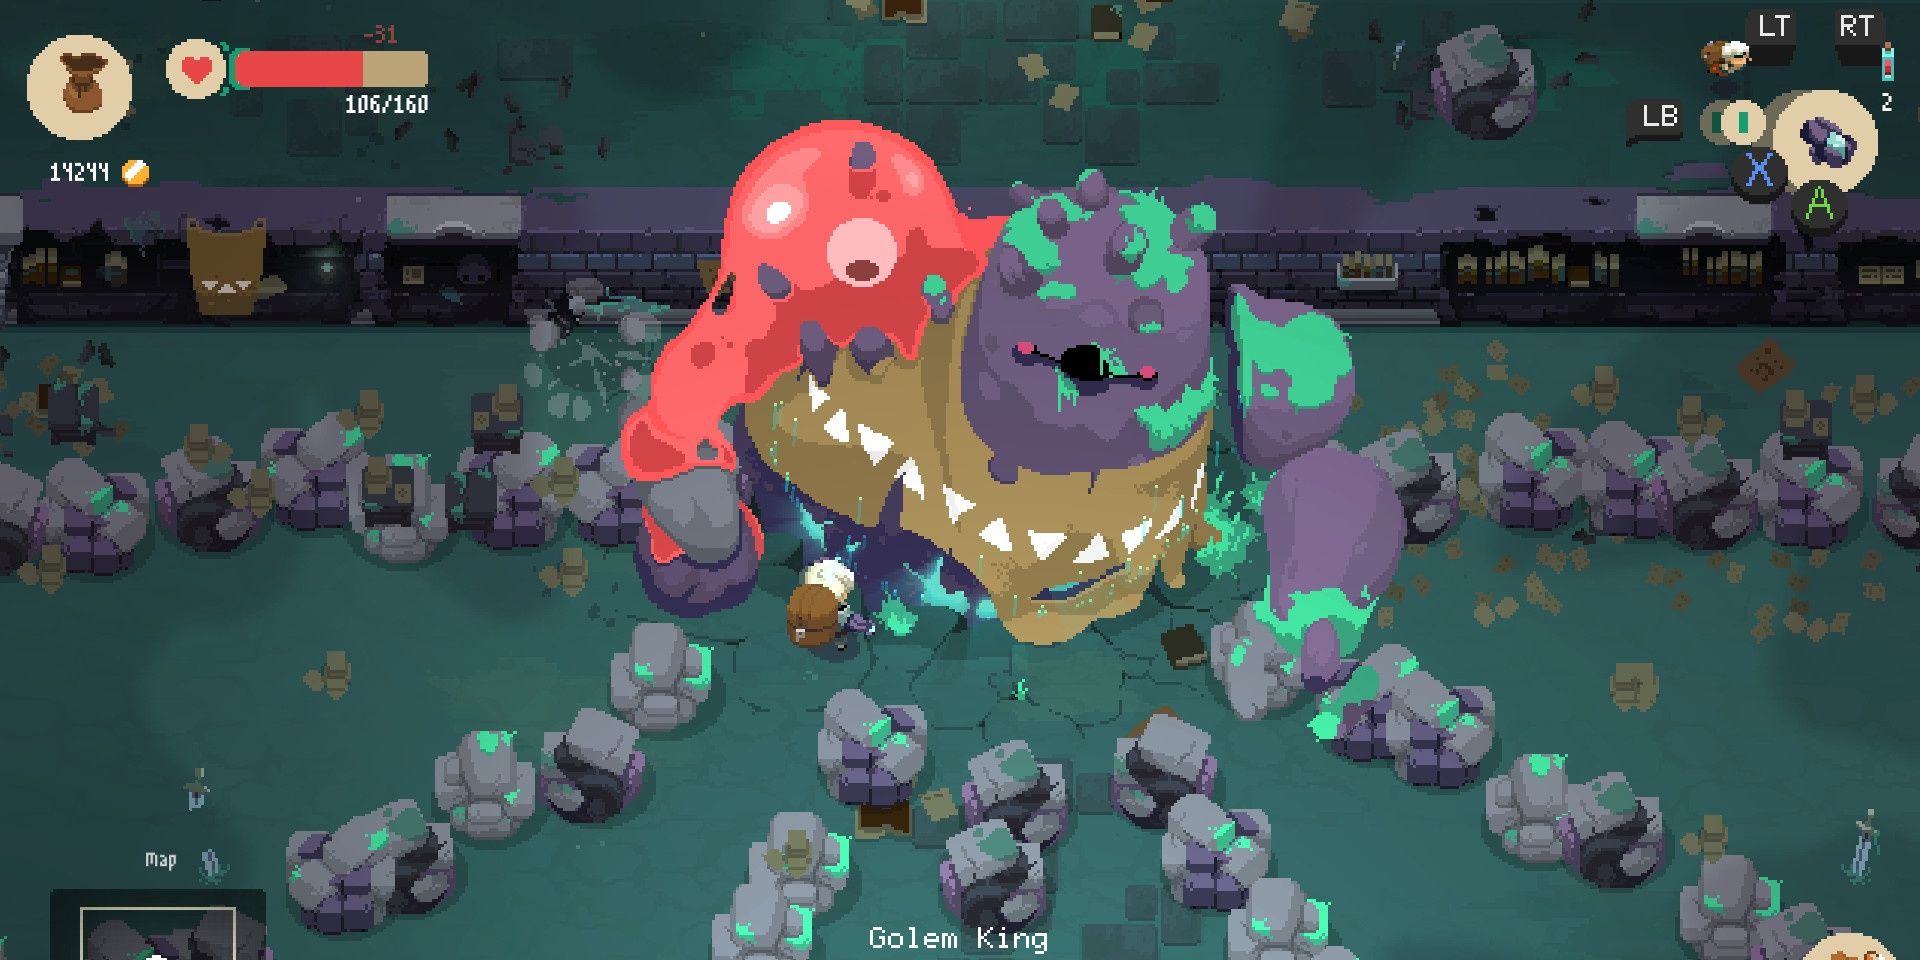 Player fighting the Colem King in Moonlighter